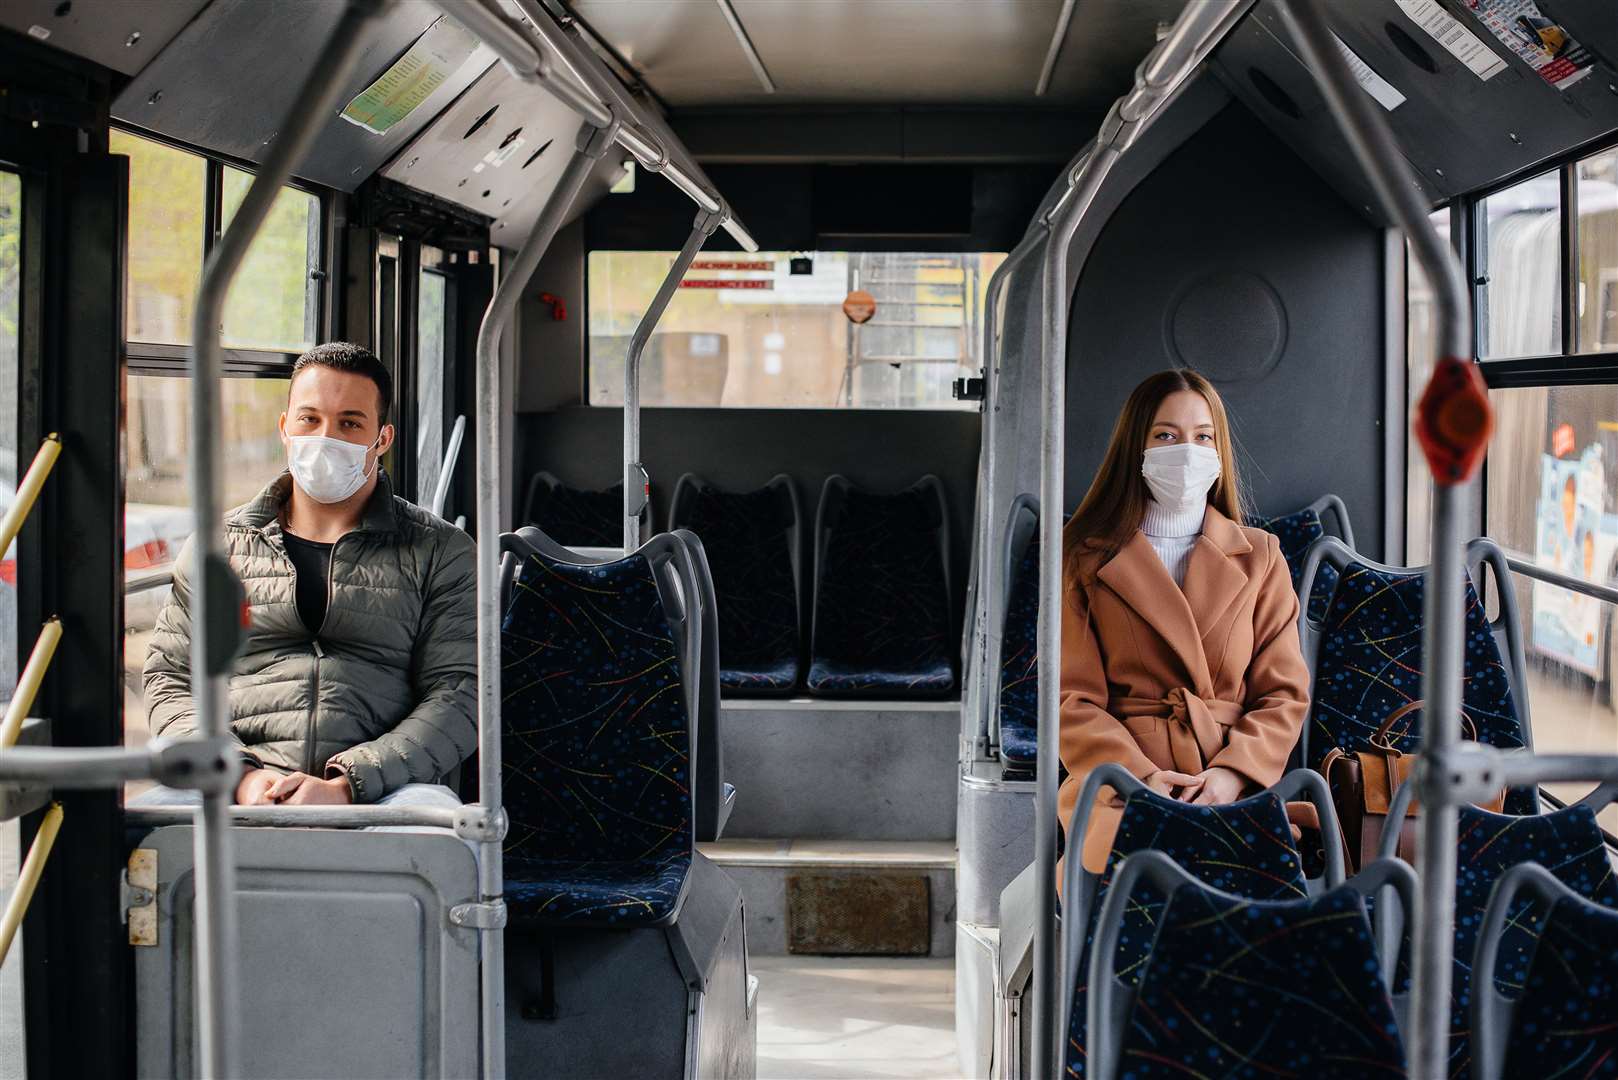 Passengers on public transport during the coronavirus pandemic keep their distance from each other.